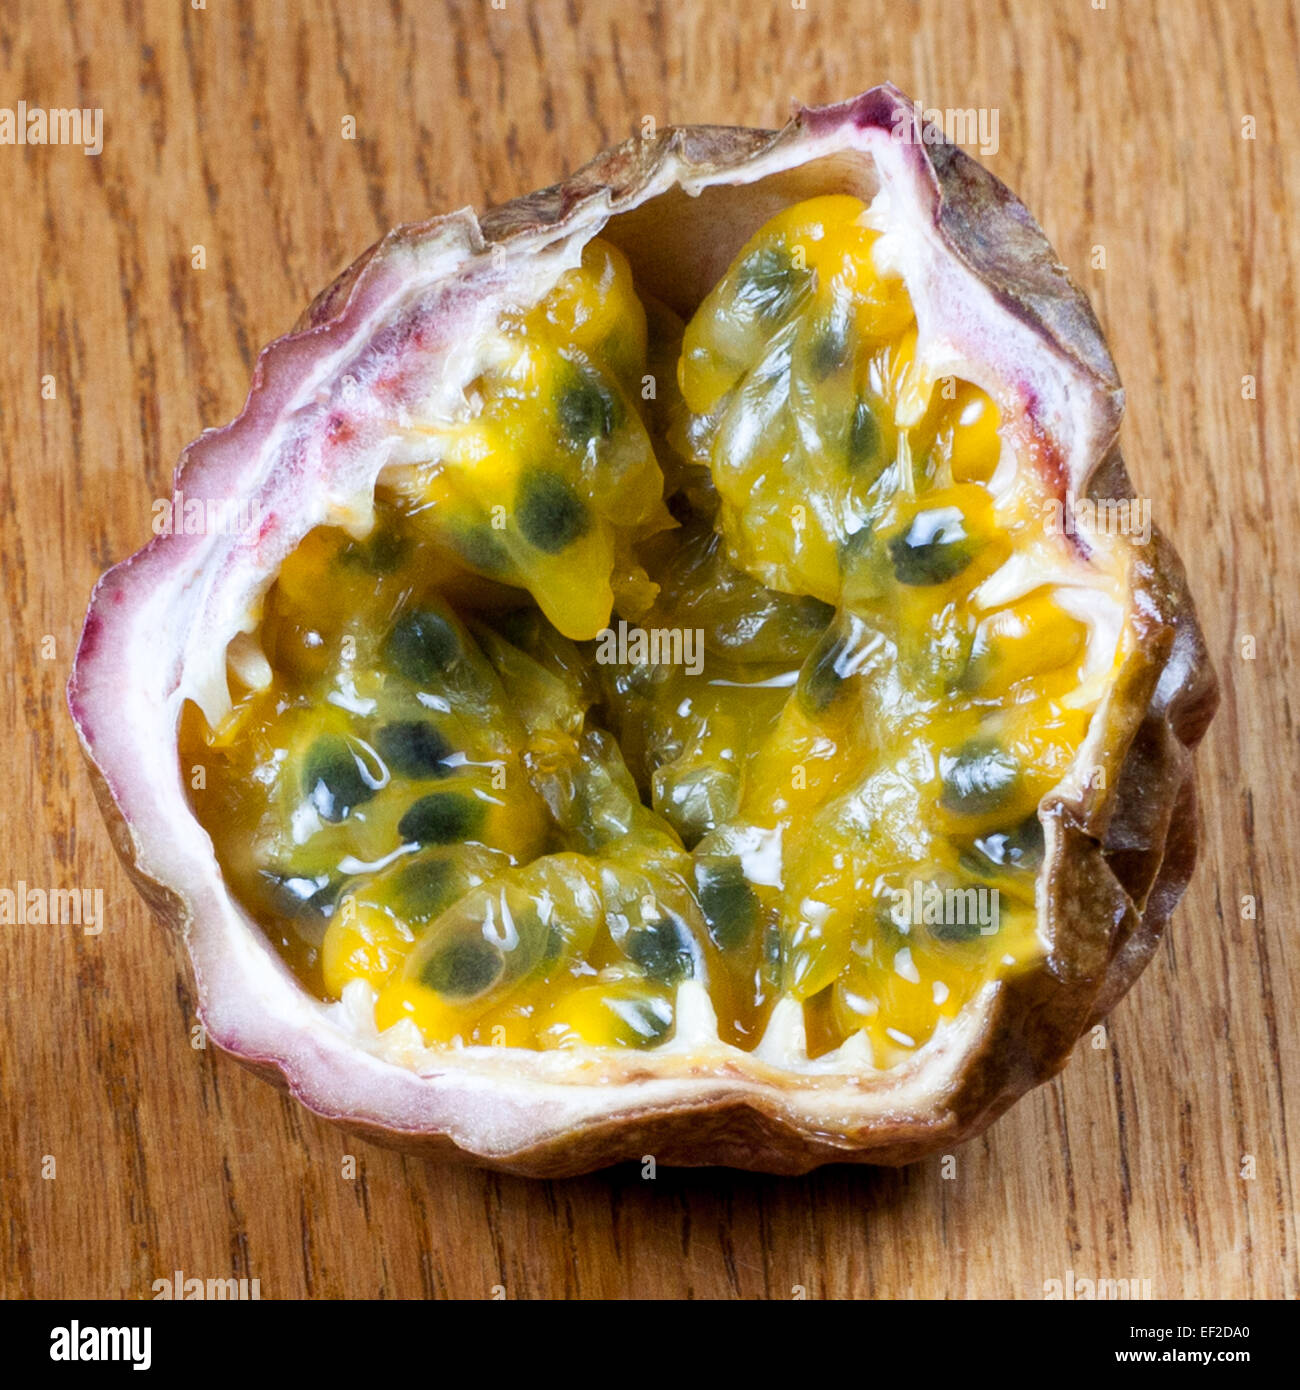 View into a cut passion fruit Stock Photo